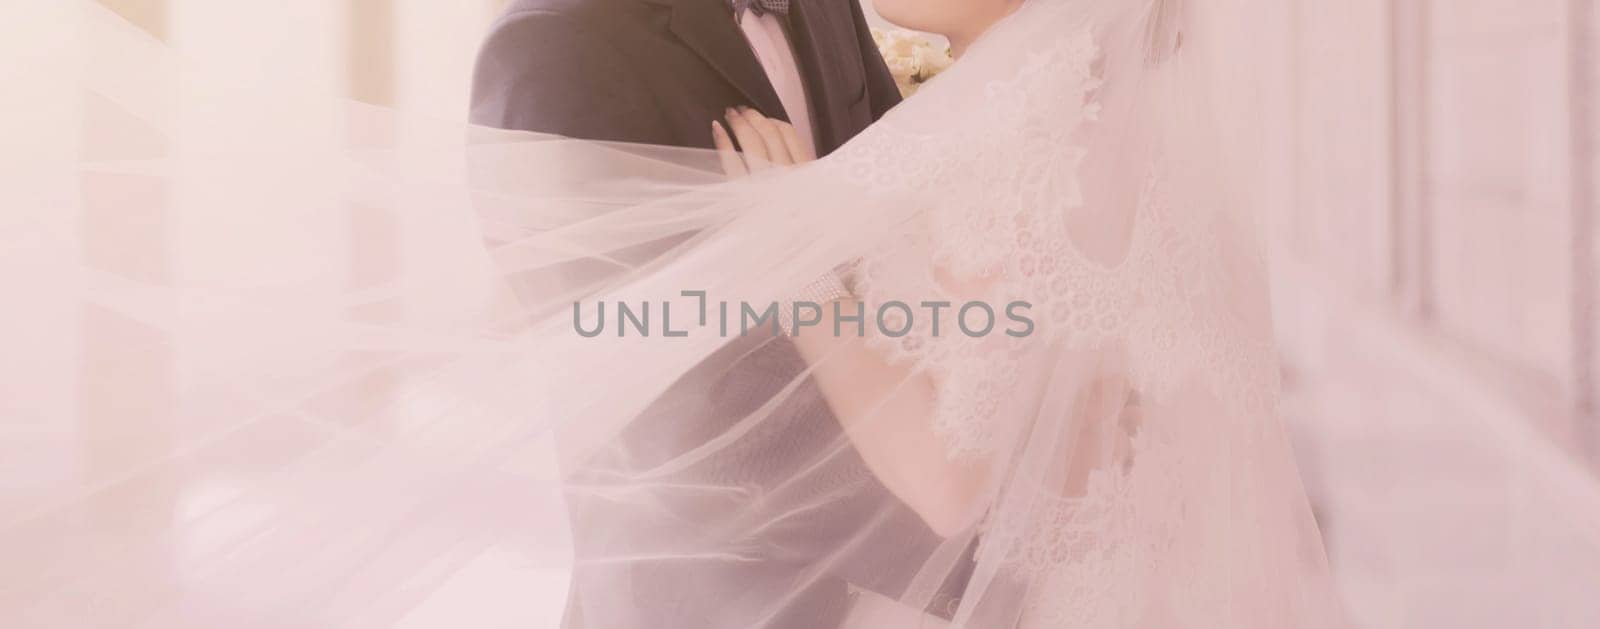 Young wedding couple. Bride and groom embracing at wedding day